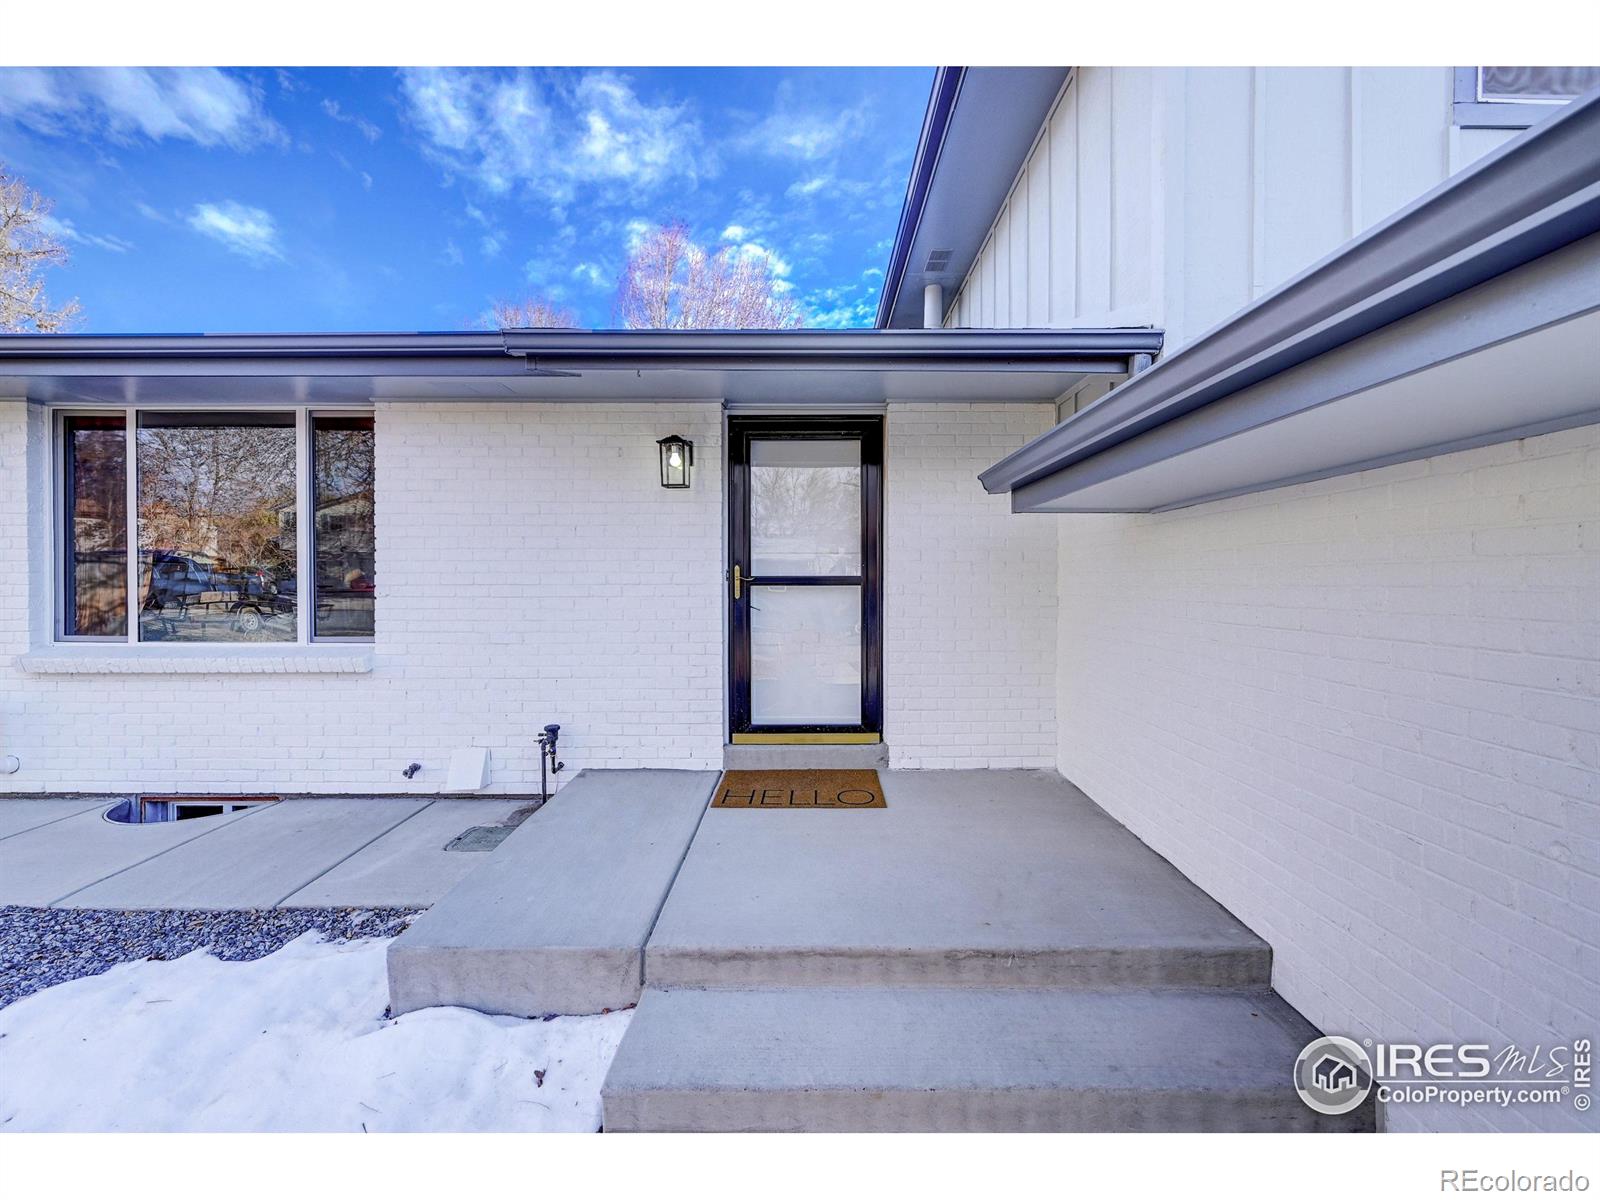 Report Image for 8689 W 84th Circle,Arvada, Colorado